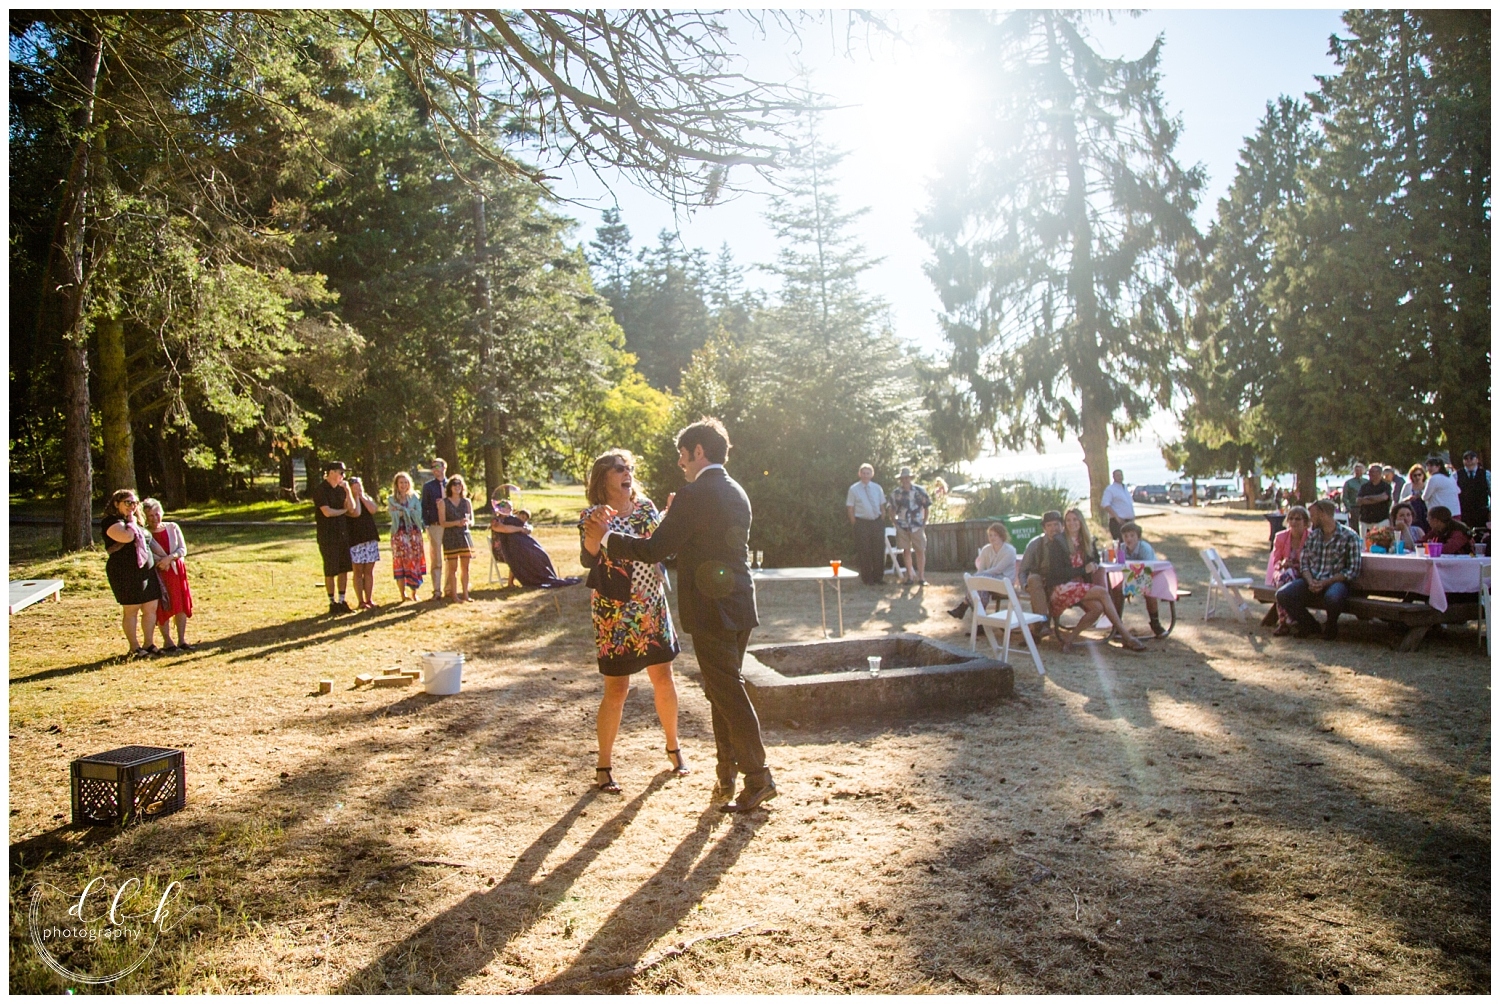 groom dances with his mother at Washington Park picnic area wedding reception